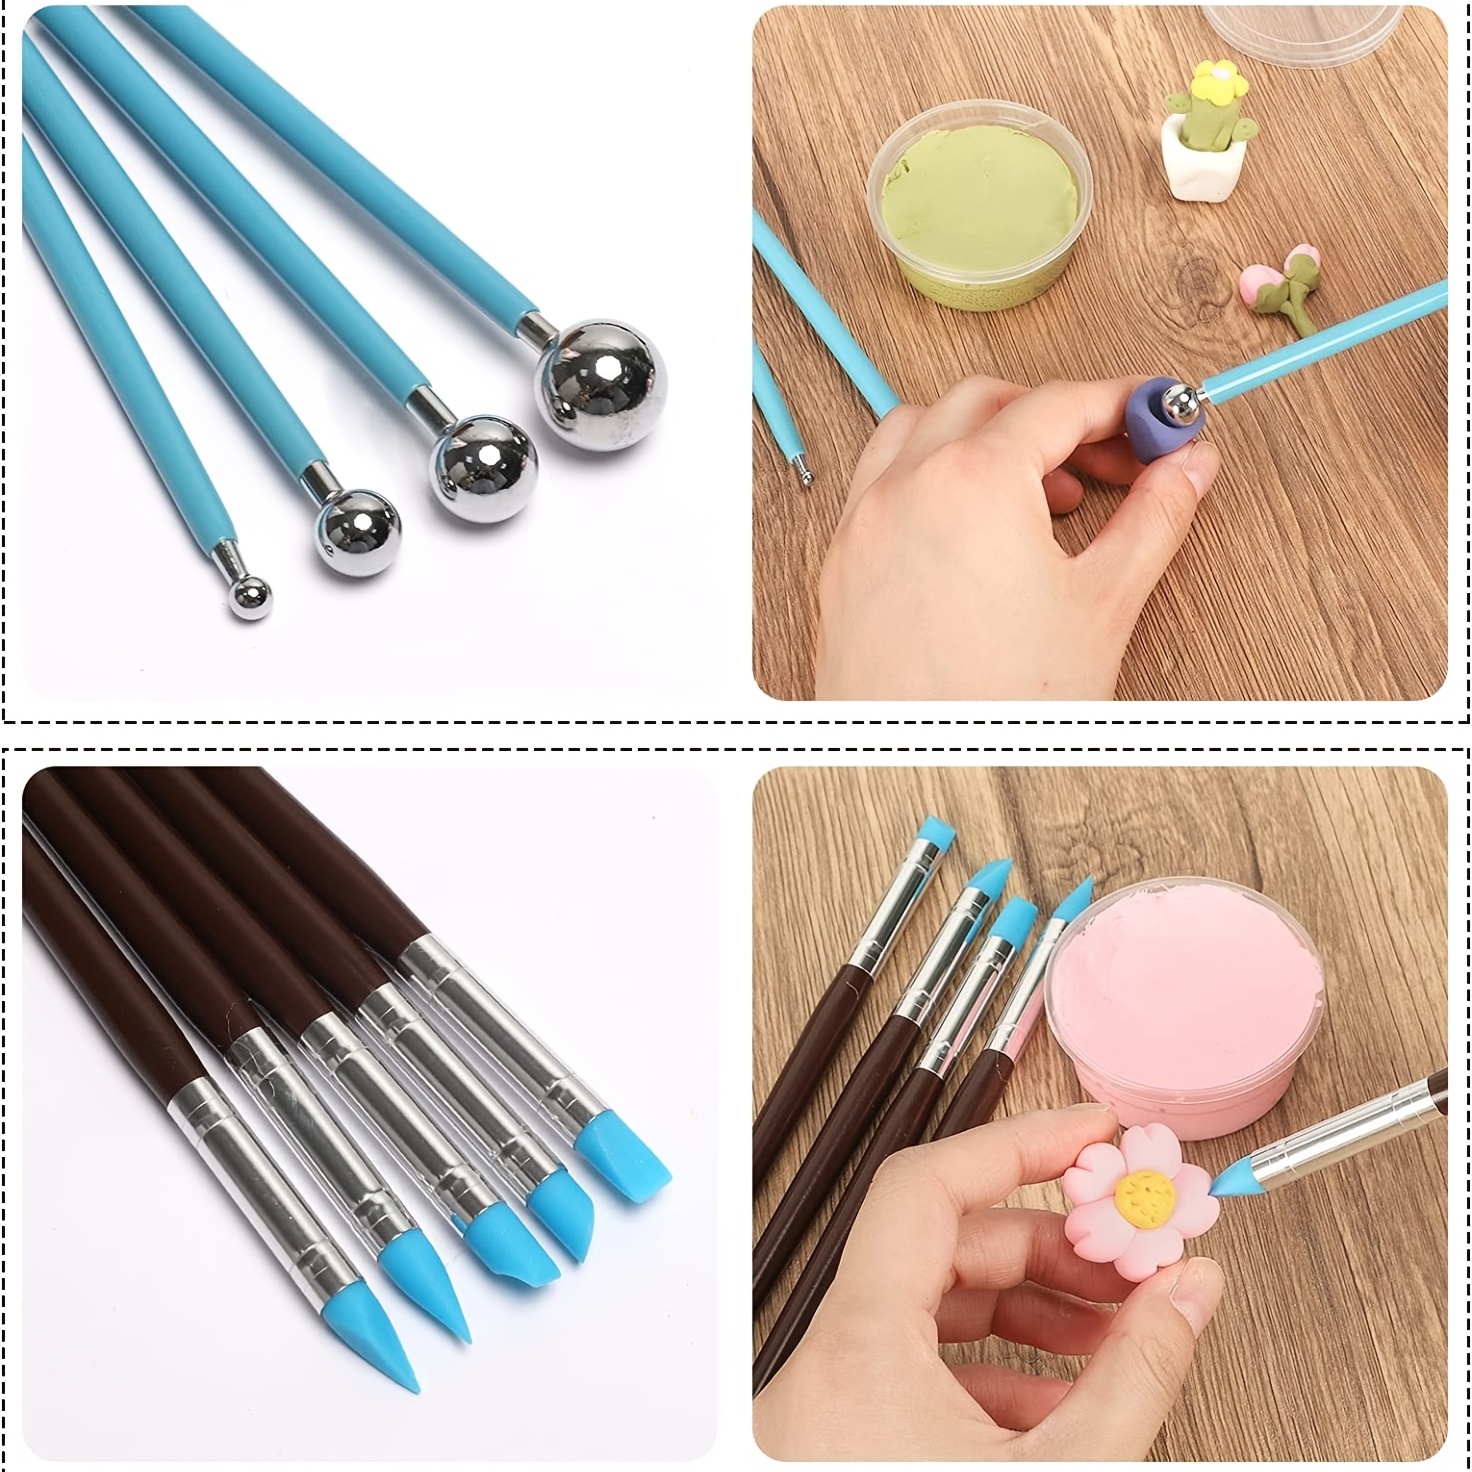 AOWOO 26 Pcs Polymer Clay Tools Set, Clay Sculpting Tools, Air Dry Clay Tool,  Ceramic Supplies for Kids and Adults, Pottery  Craft,Baking,Carving,Drawing,Dotting,Molding,Modeling,Shaping 